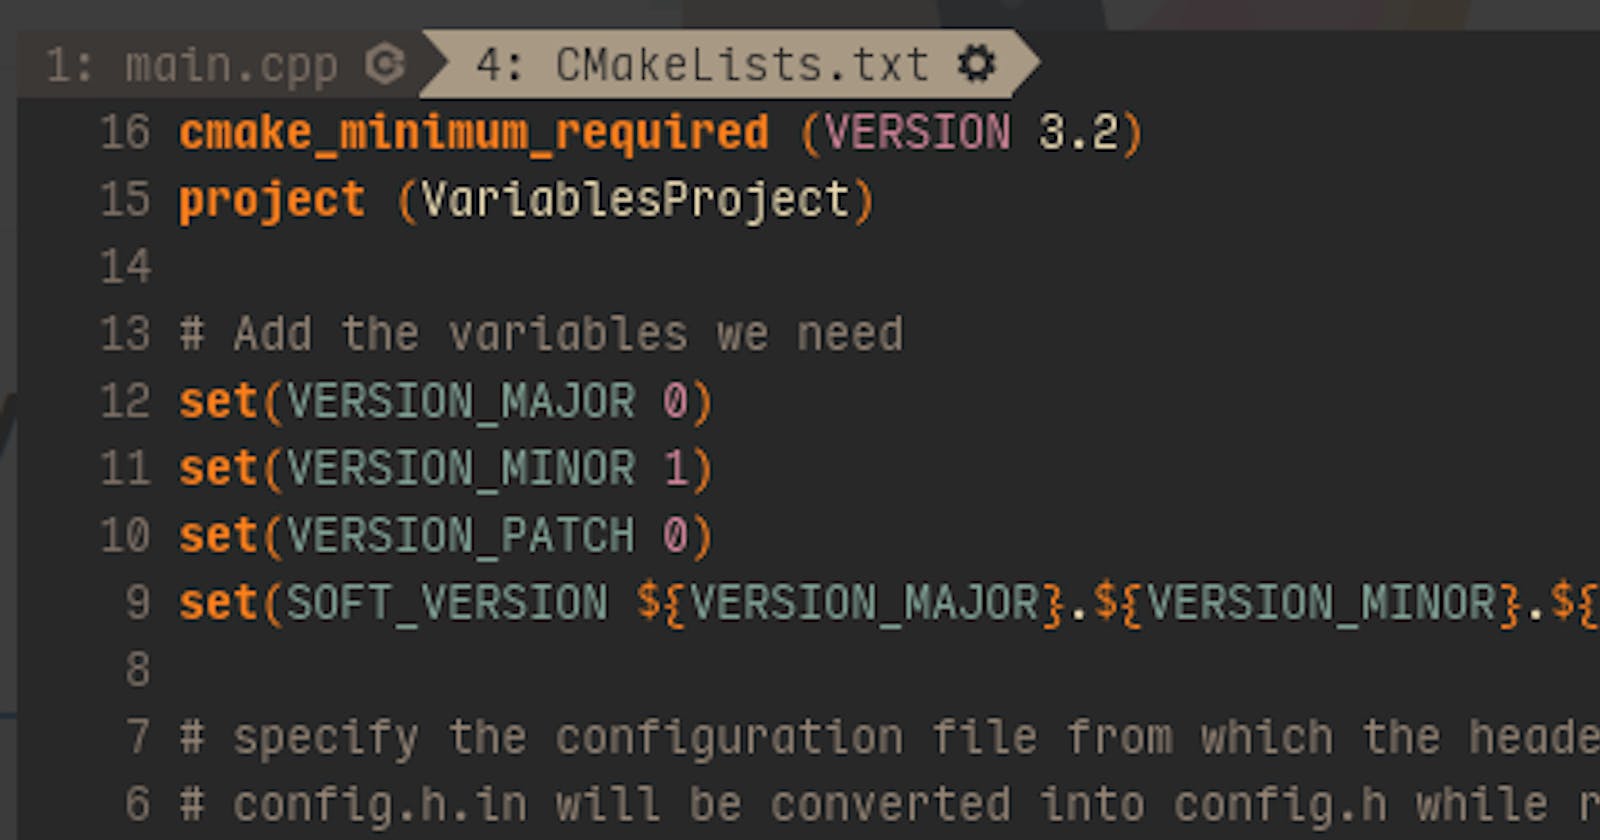 Using Cmake defined variables in c++ code